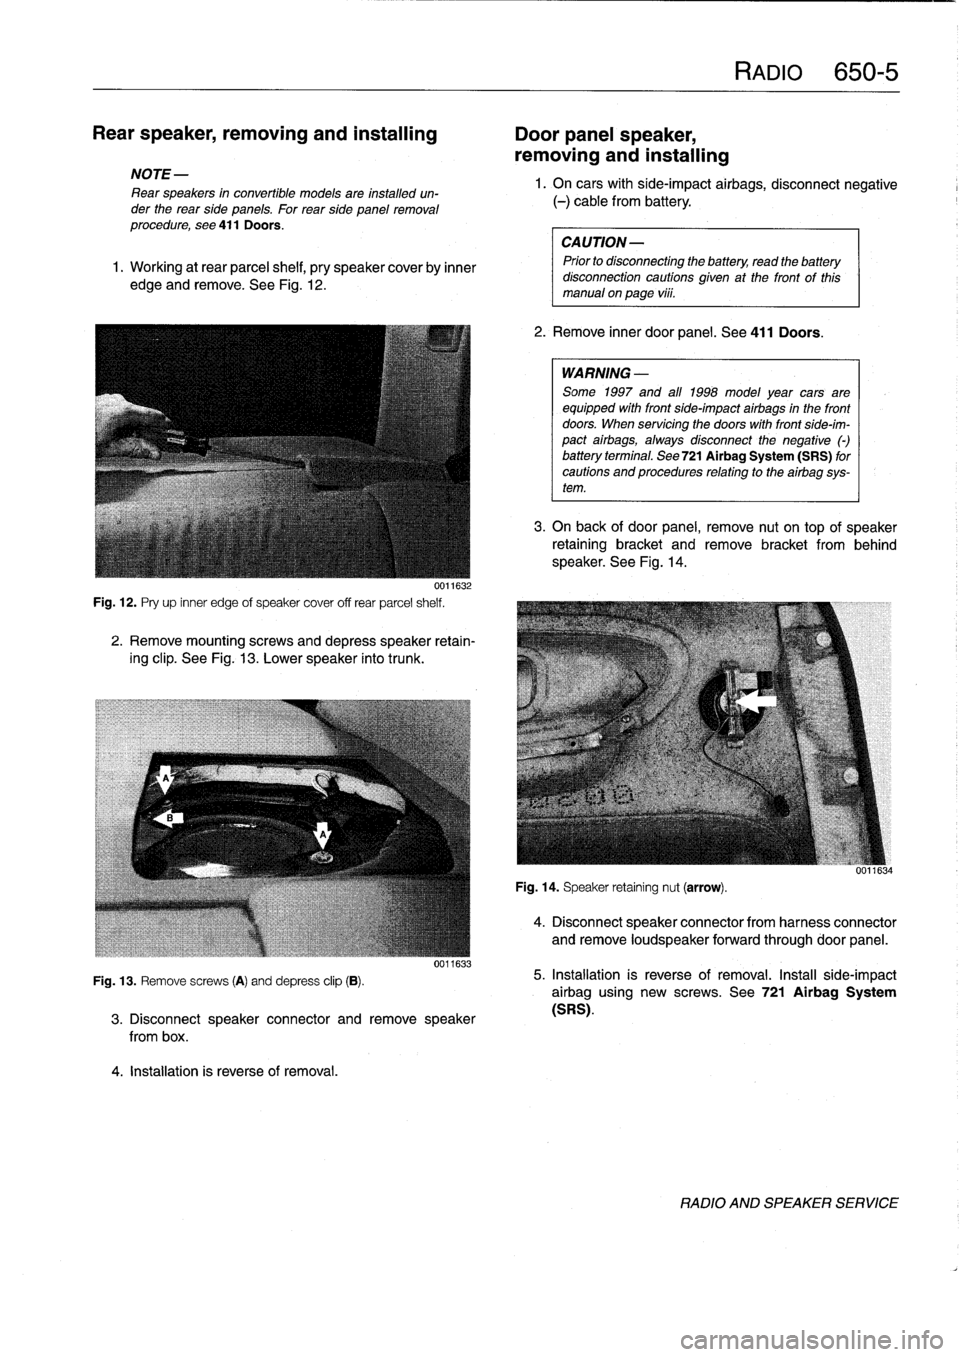 BMW 318i 1997 E36 Service Manual 
Rear
speaker,
removing
and
installing

	

Door
panel
speaker,

removing
and
installing

NOTE
-

Rear
speakers
in
convertible
models
are
installed
un-
der
the
rear
side
panels
.
For
rearside
panelremo